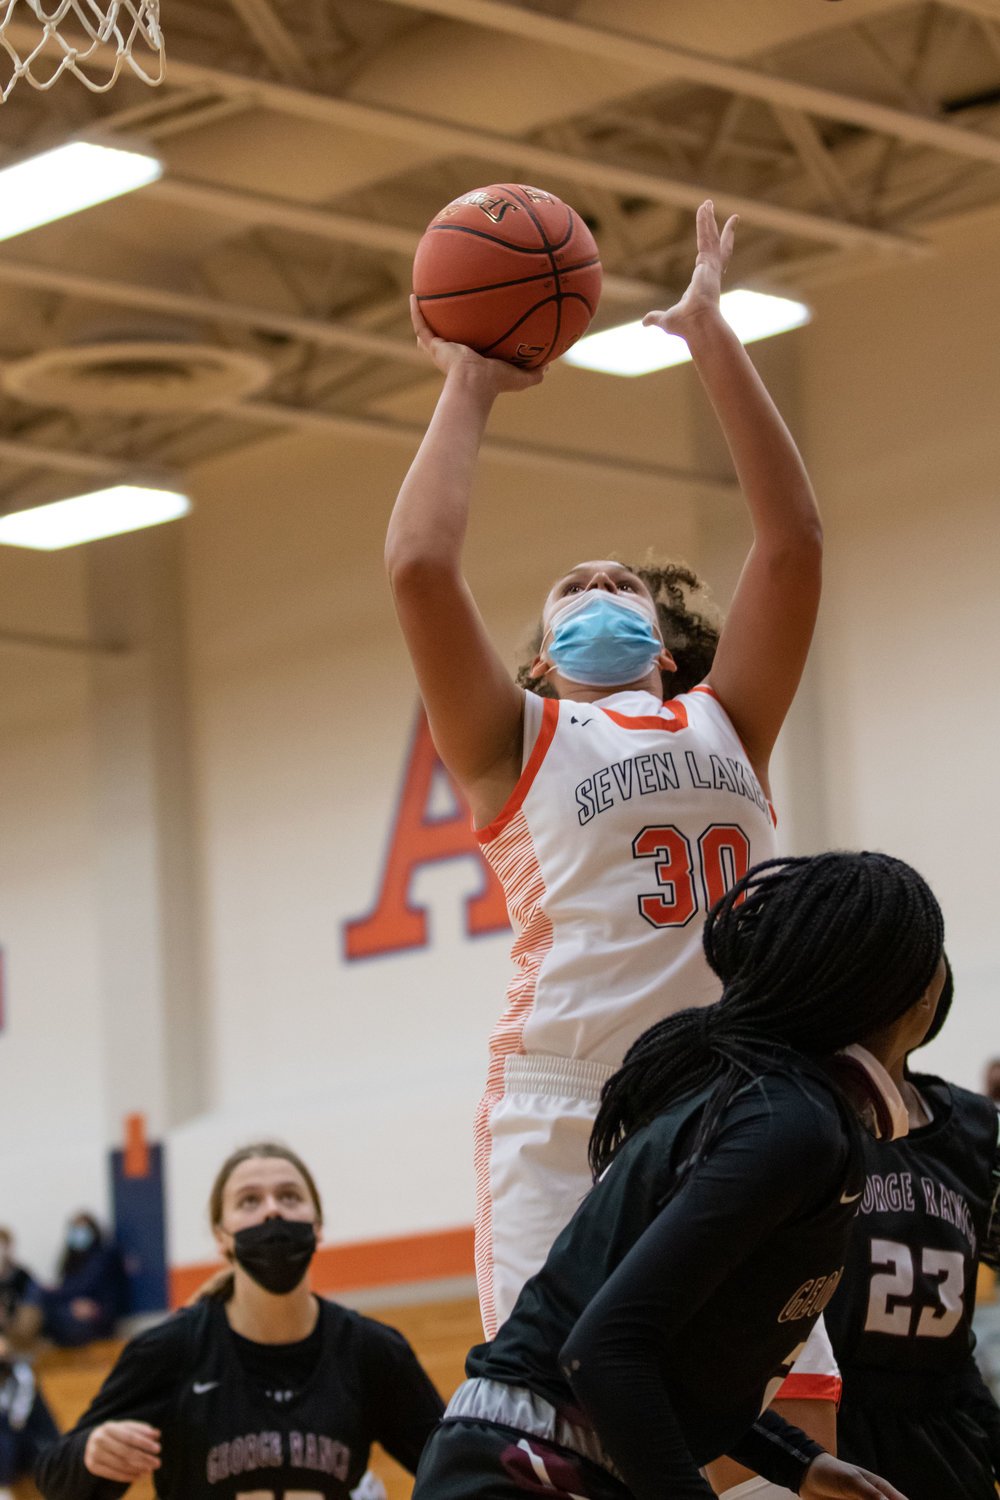 Seven Lakes freshman forward Justice Carlton goes up for a basket during a non-district game against George Ranch on Dec. 14 at Seven Lakes High.